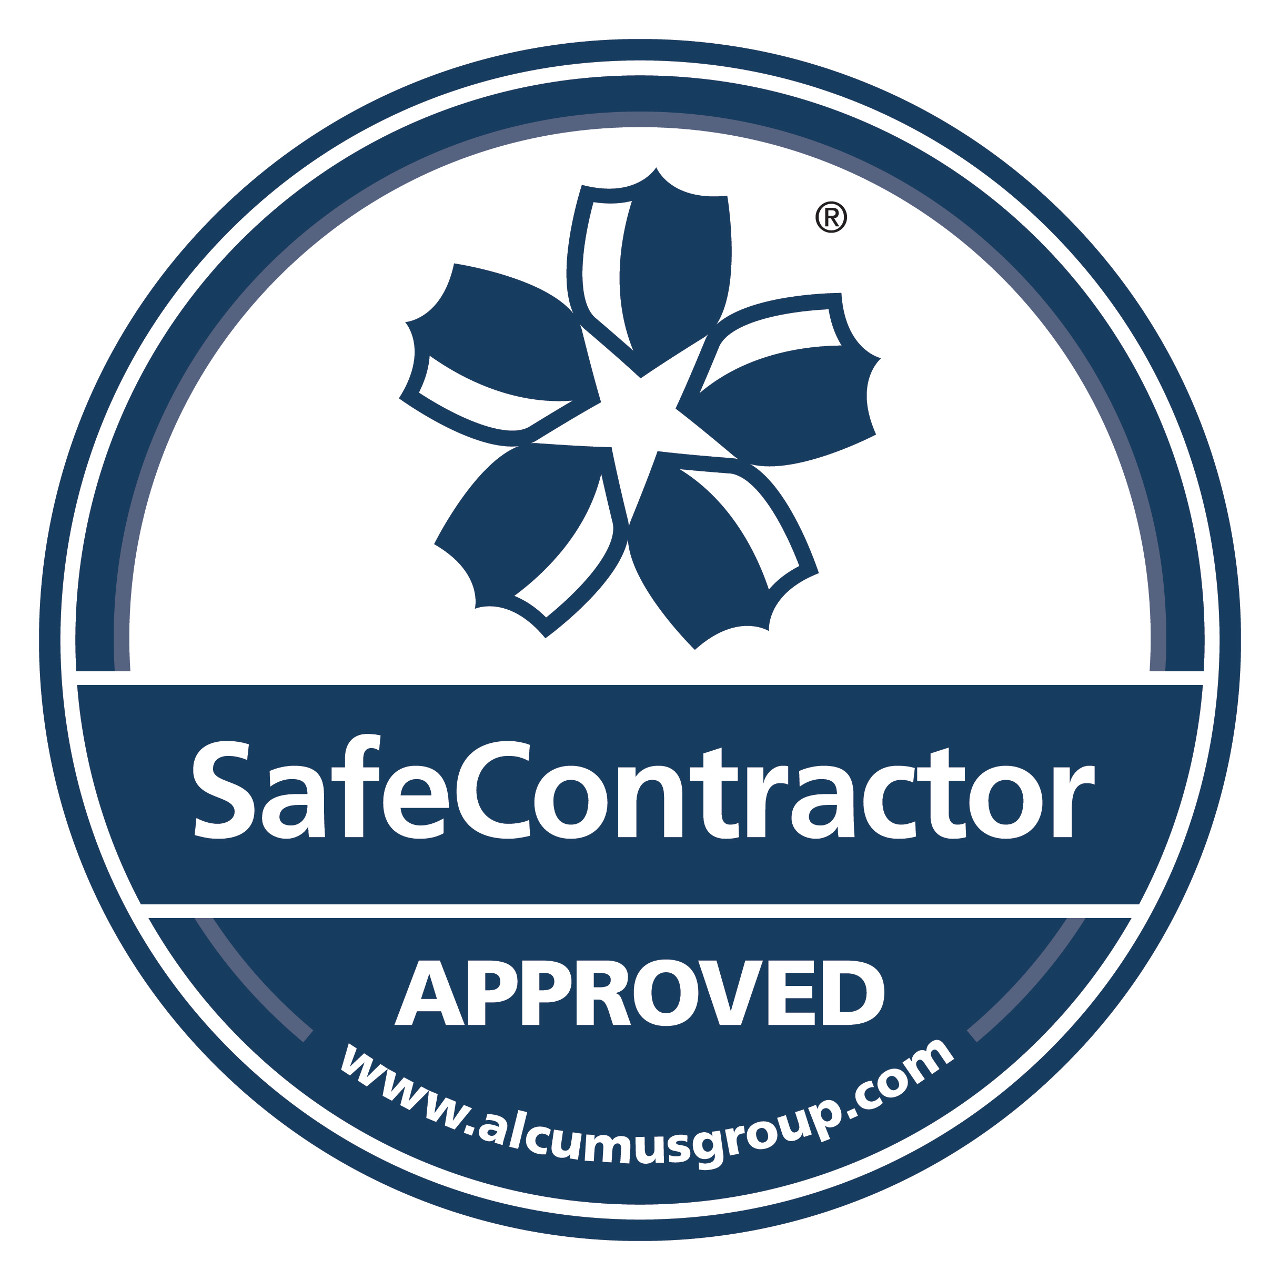 Alcumus Safecontractor seal of approval